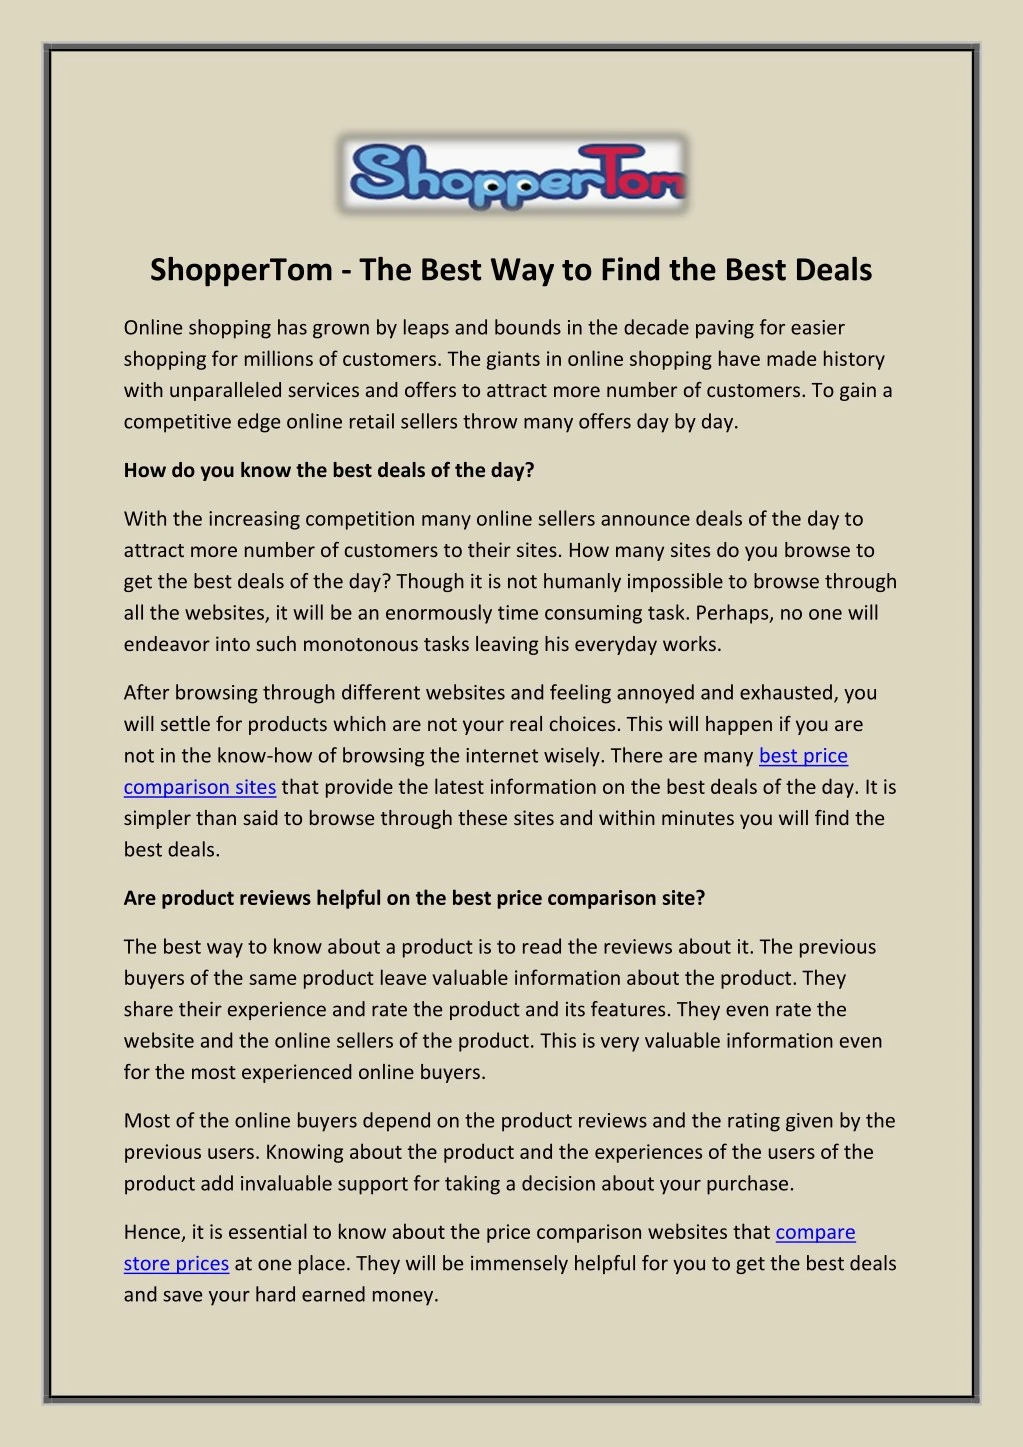 shoppertom the best way to find the best deals